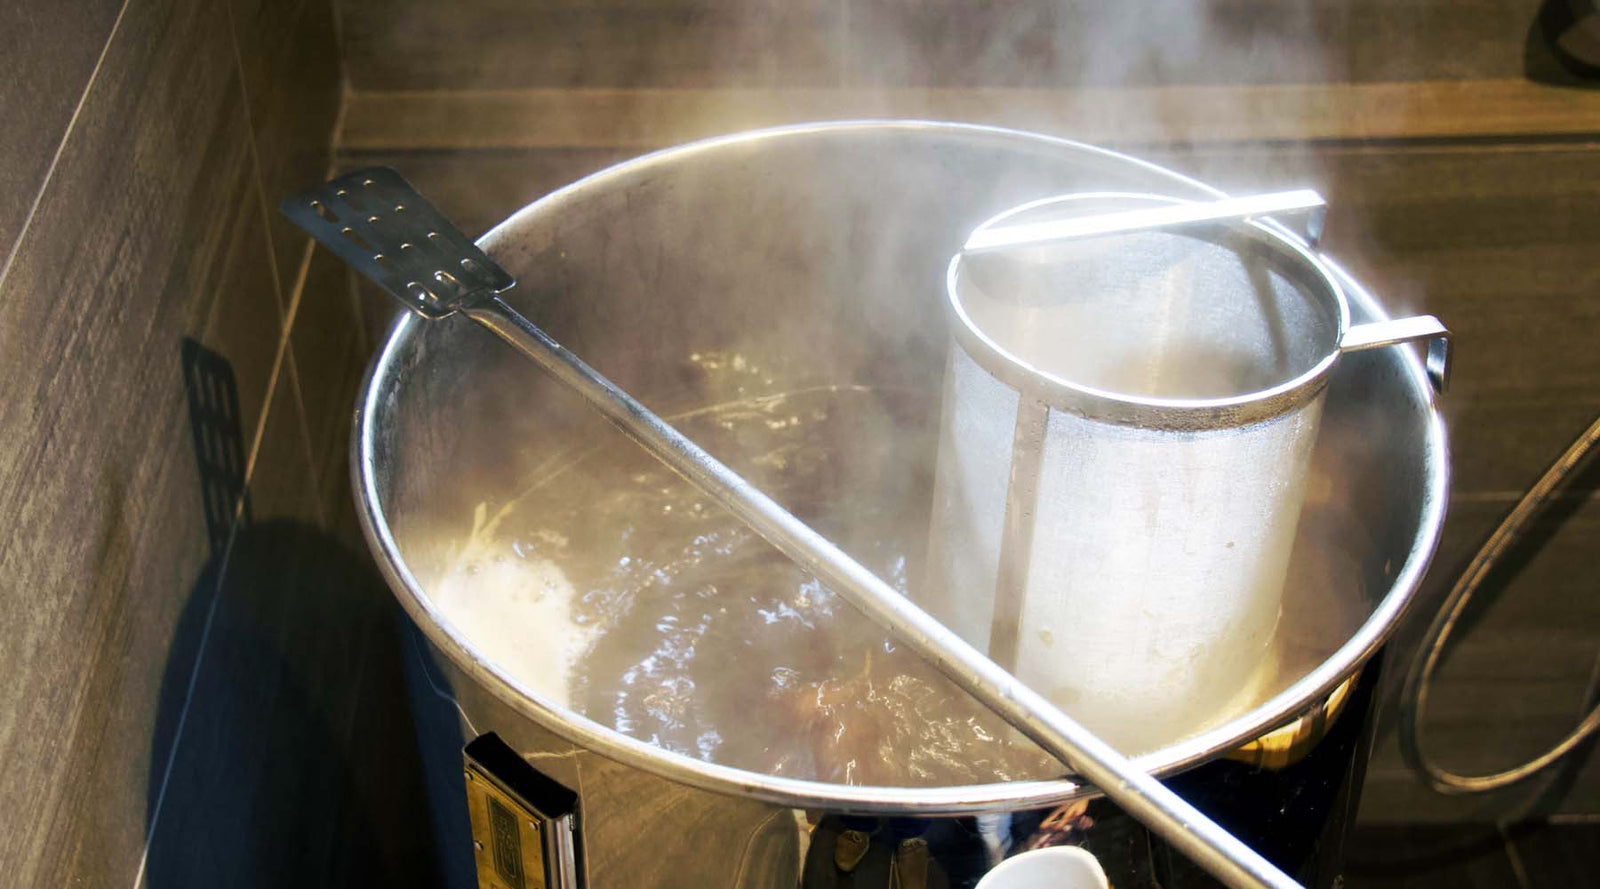 Do fast boil kettles use more energy? - Which? News